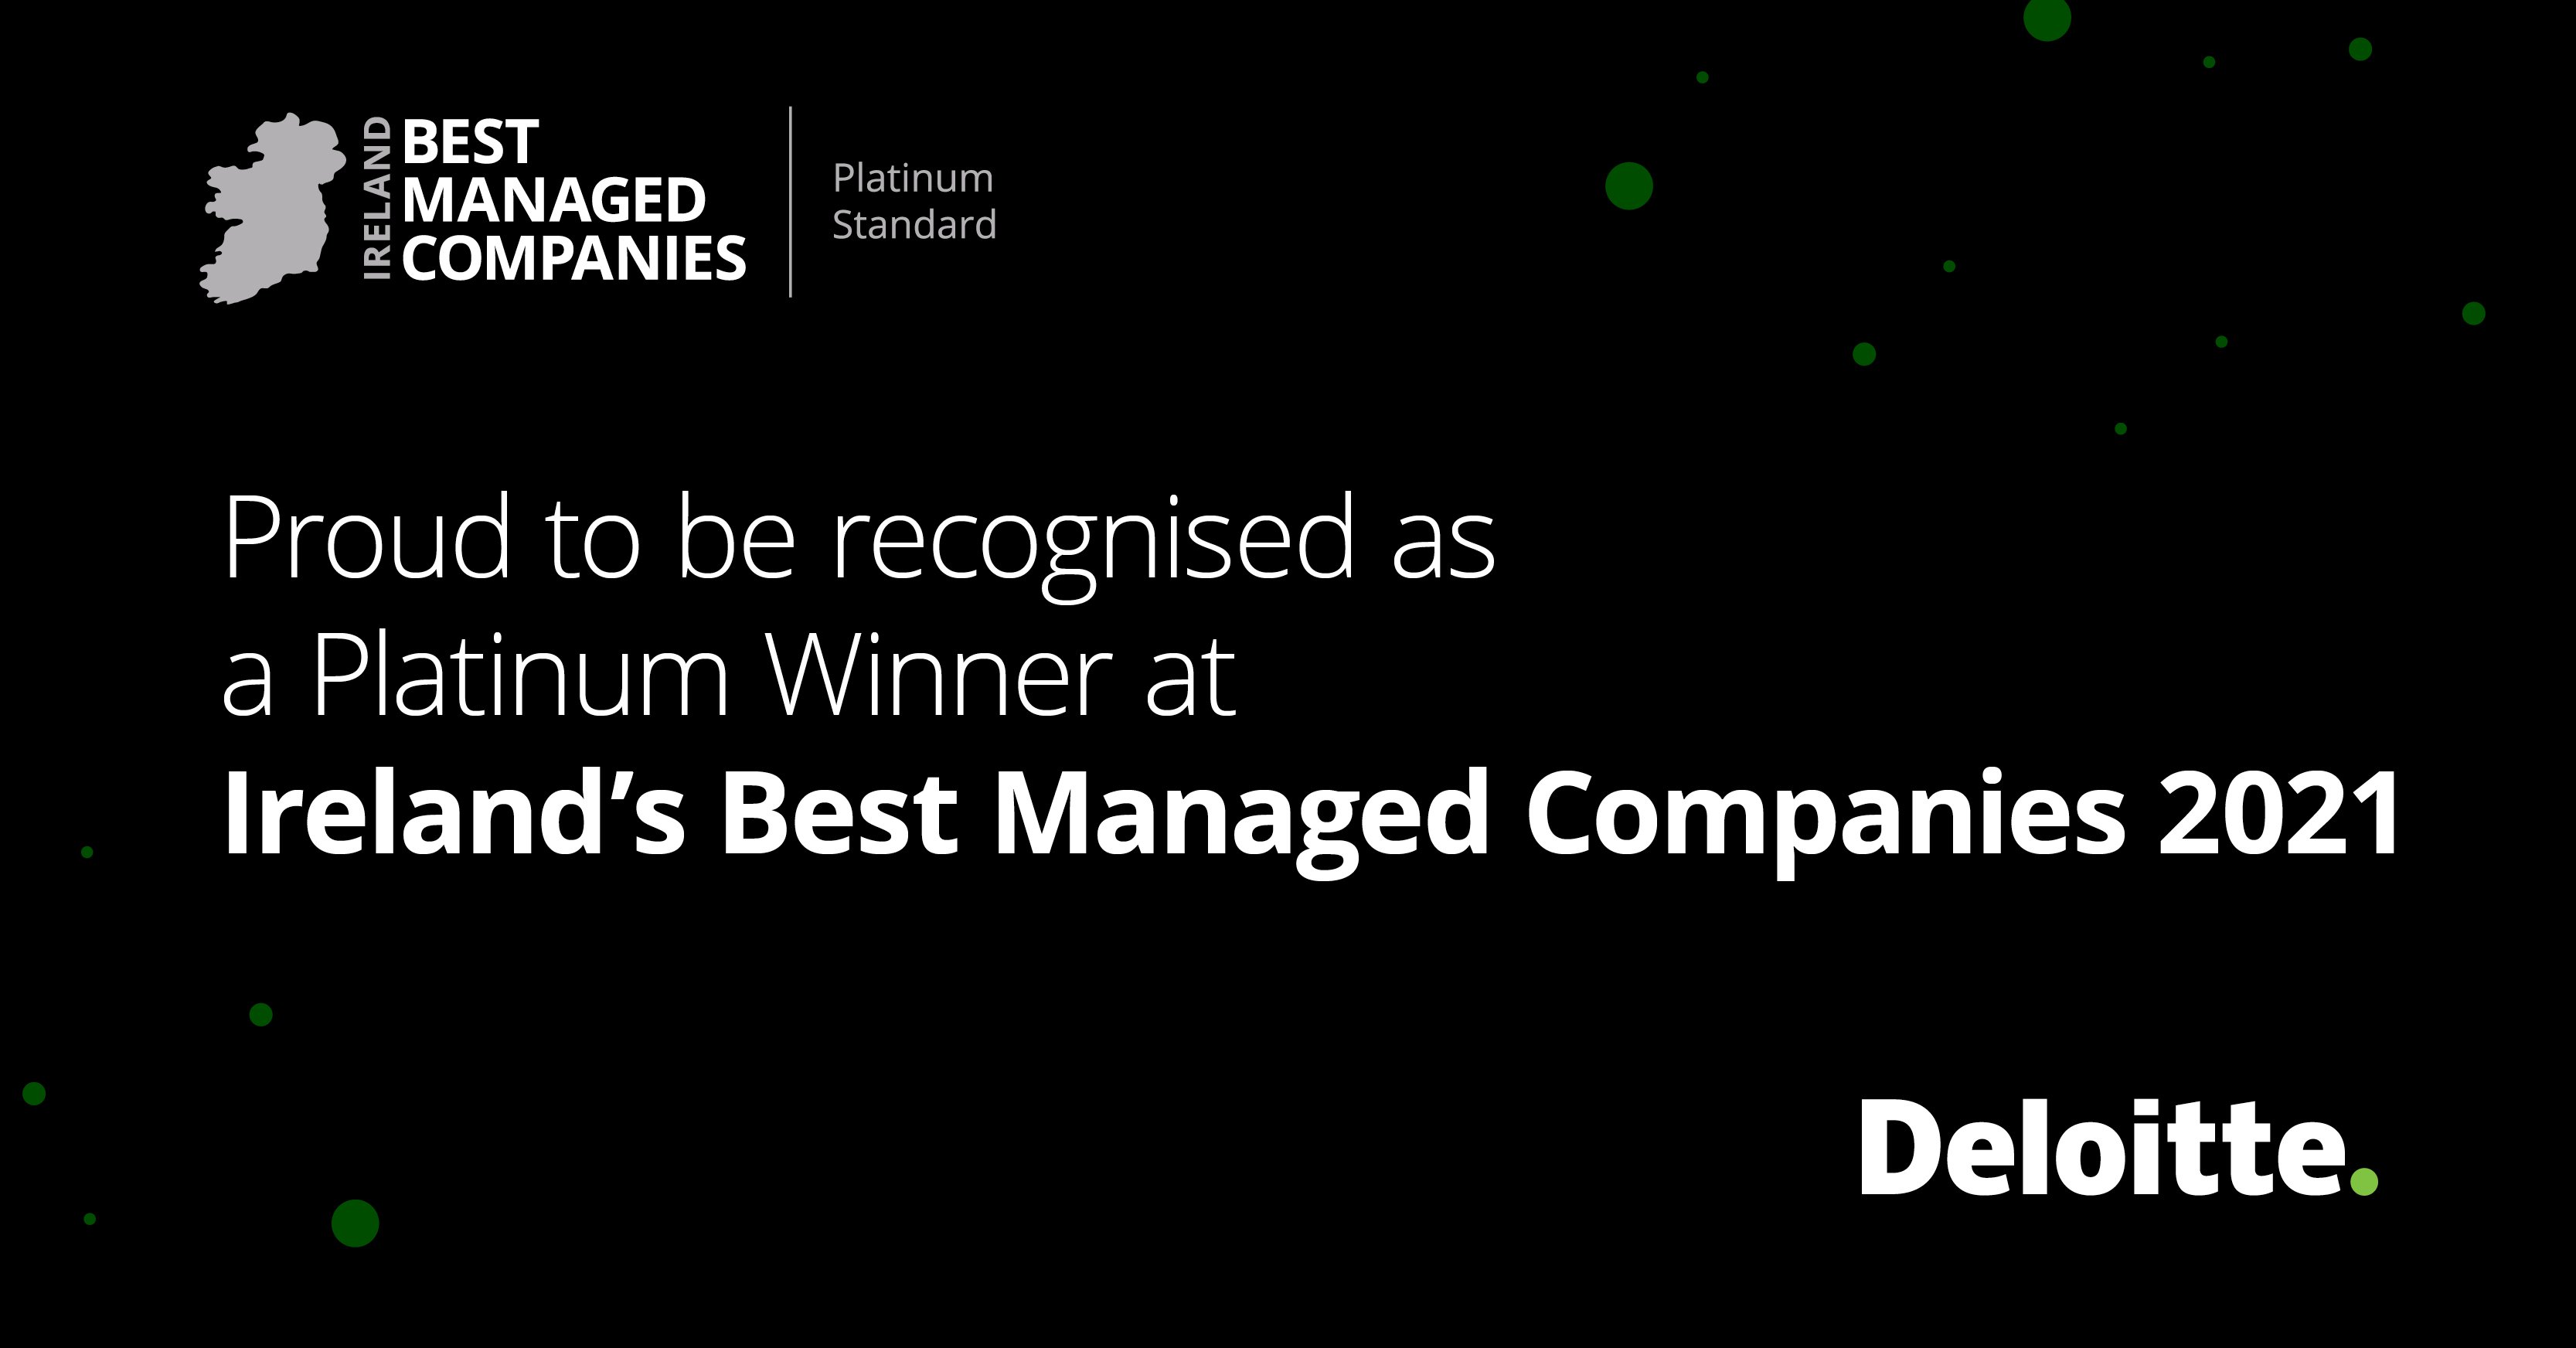 ByrneLooby announced as a Platinum Deloitte Best Managed Company 2021